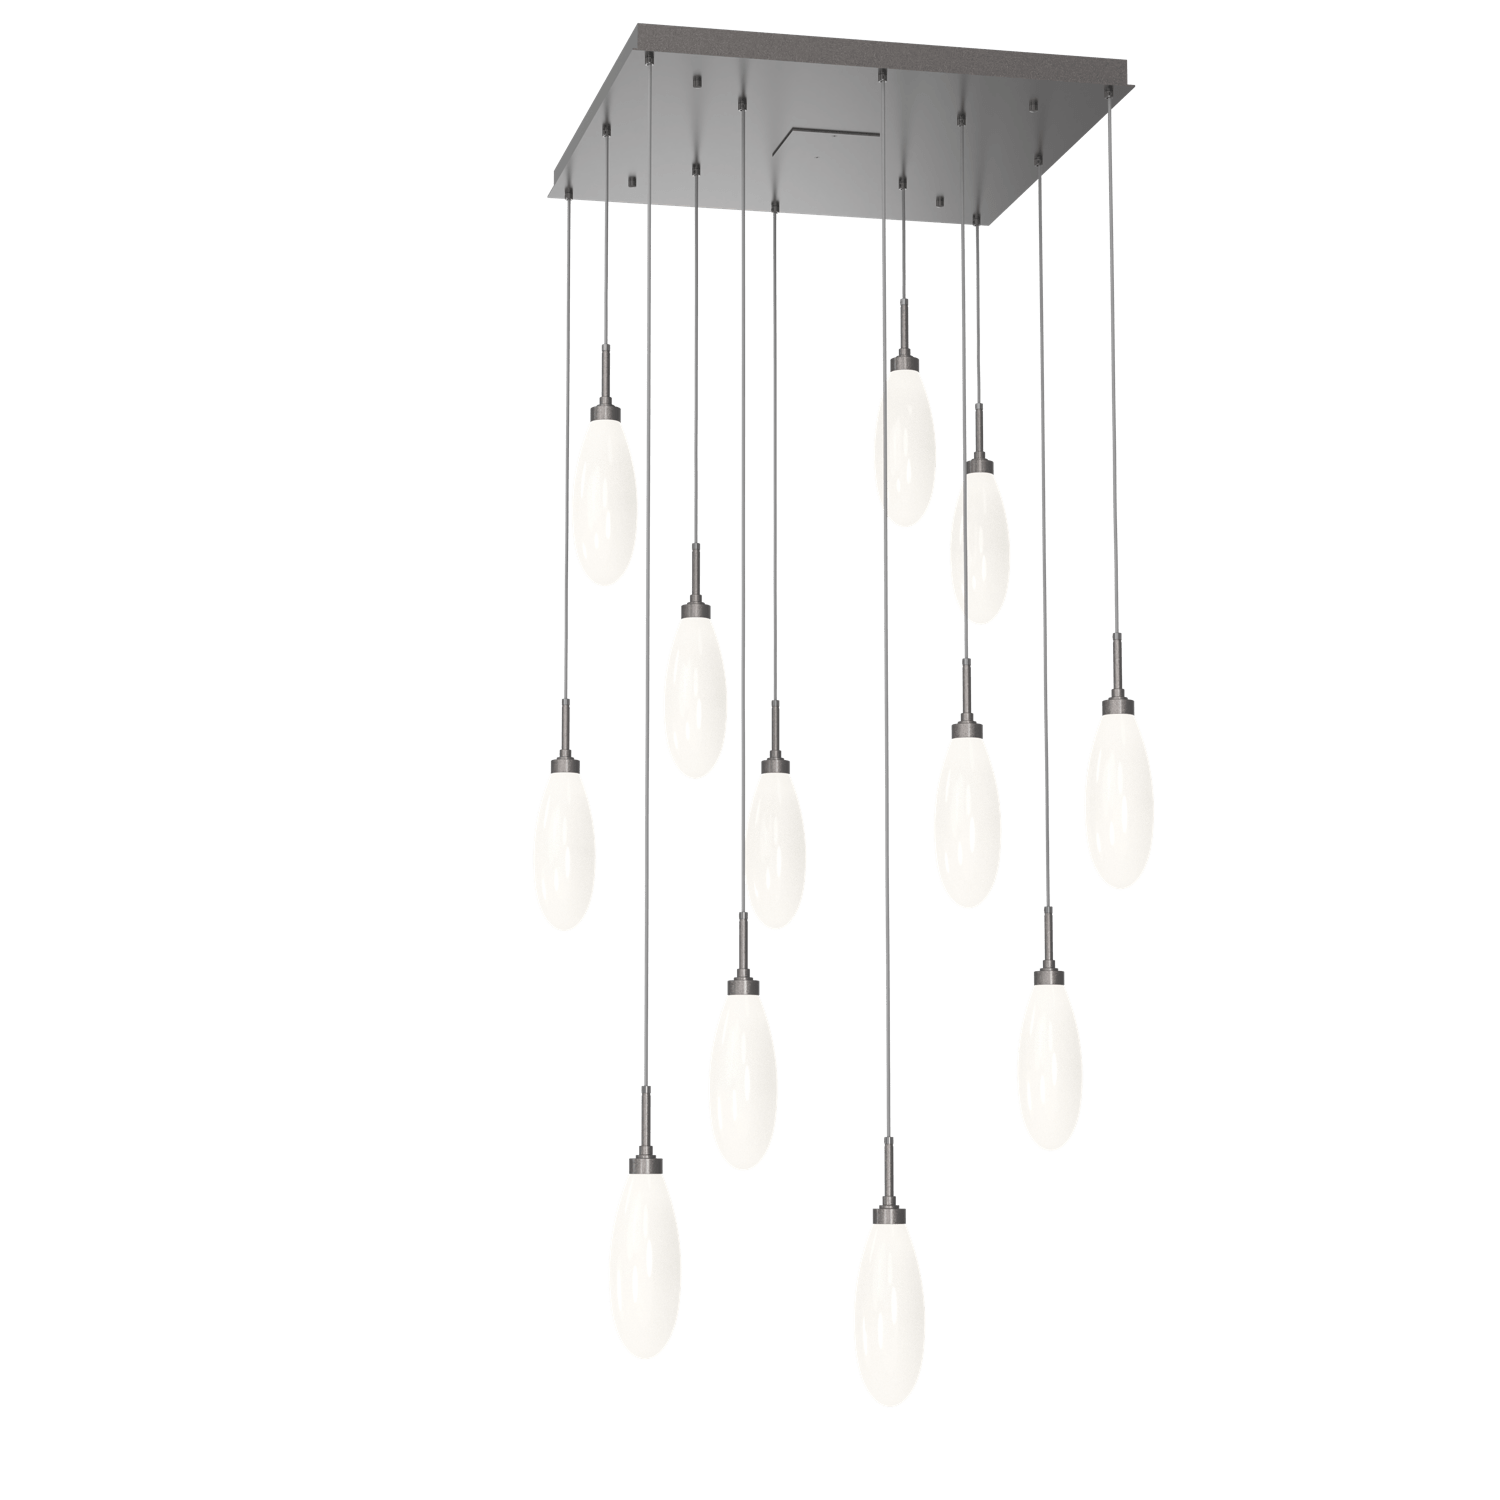 CHB0071-12-GP-WL-LL-Hammerton-Studio-Fiori-12-light-square-pendant-chandelier-with-graphite-finish-and-opal-white-glass-shades-and-LED-lamping